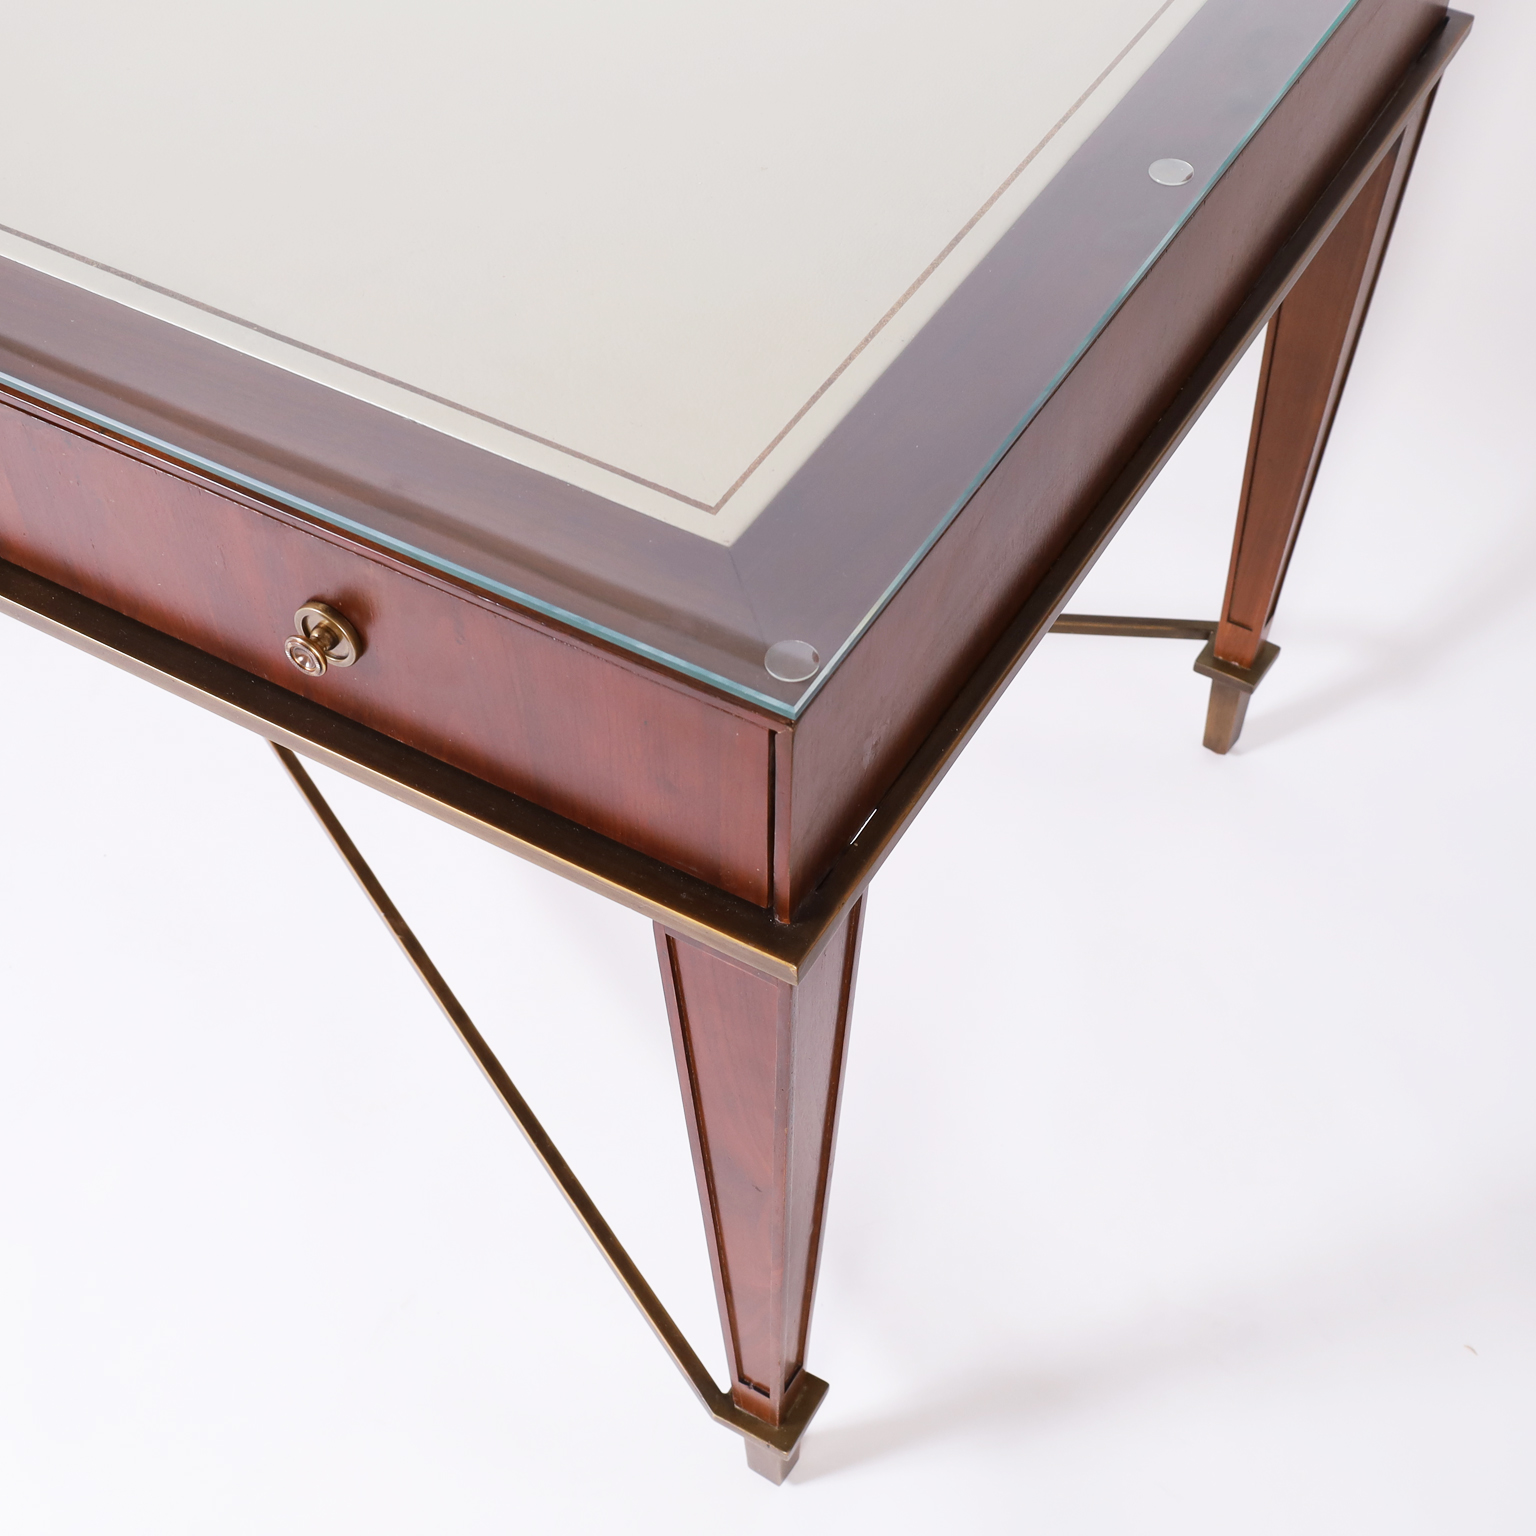 Art Deco Style Leather Top Desk by Global Views